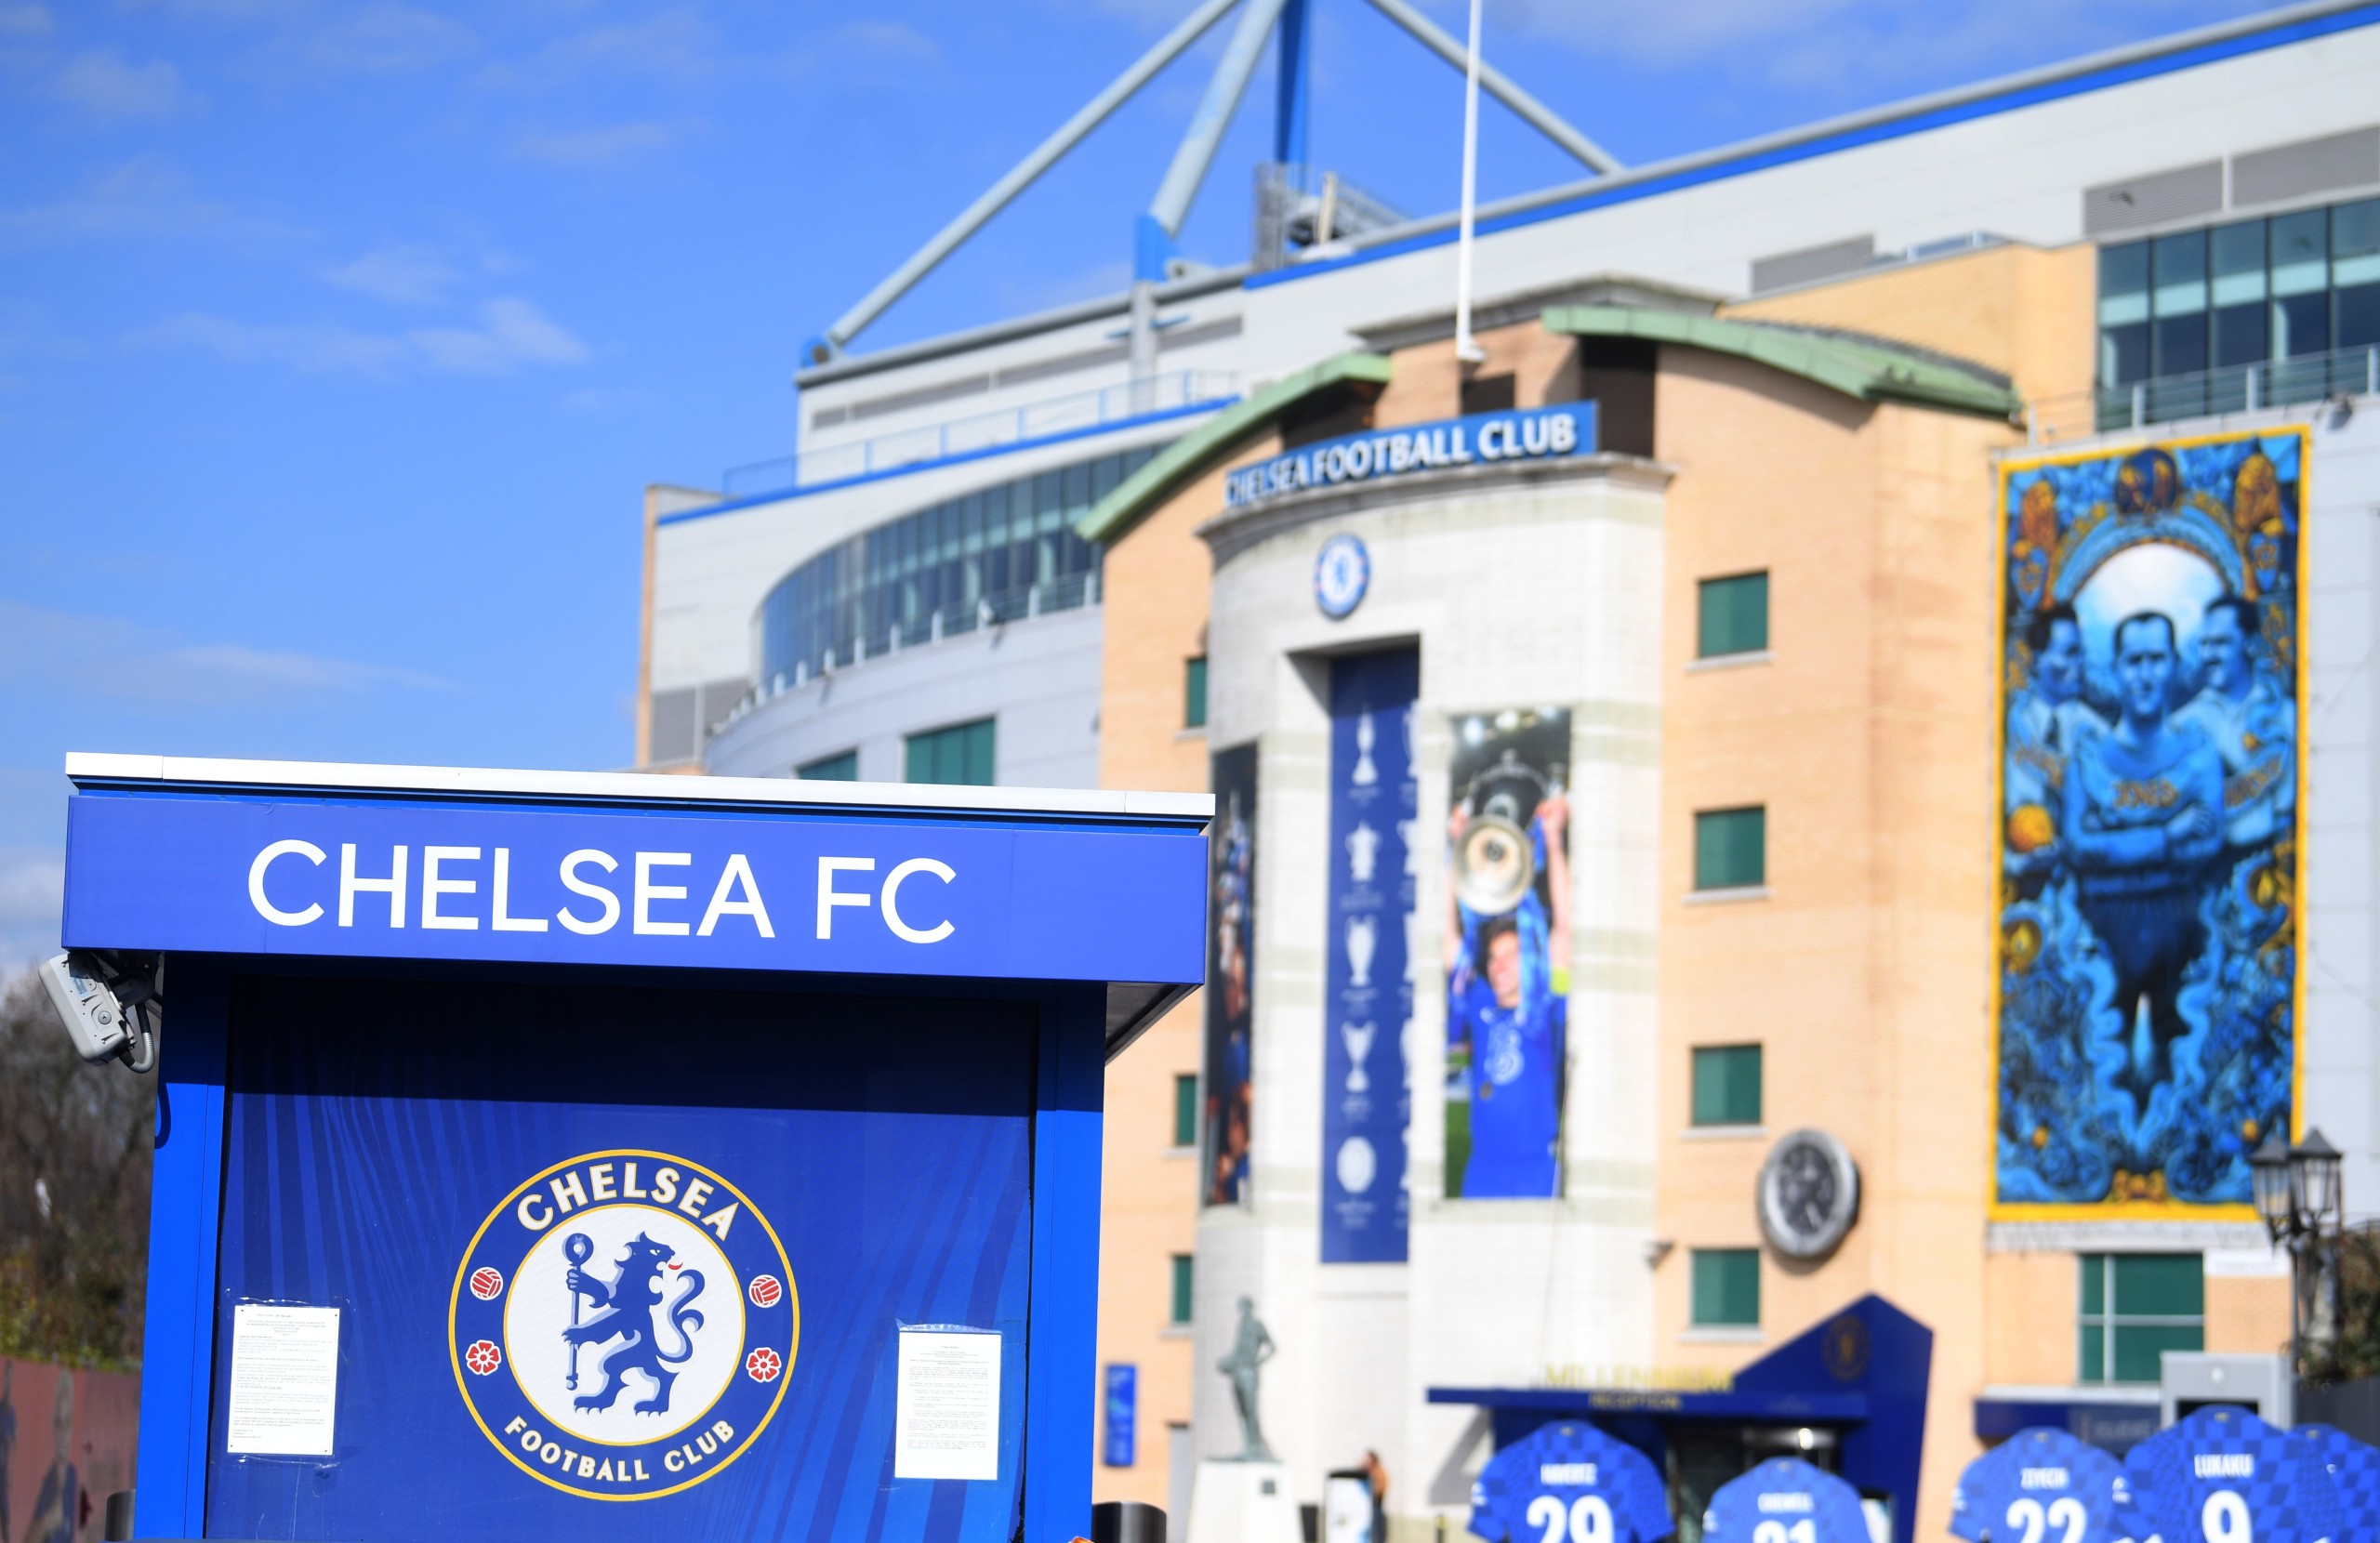 epa09814467 General view of the Chelsea Football Club's ground at Stamford Bridge in west London, Britain, 10 March 2022. Chelsea FC owner Roman Abramovich has been sanctioned by the UK government as part of its response to Russia's invasion of Ukraine.  EPA/NEIL HALL